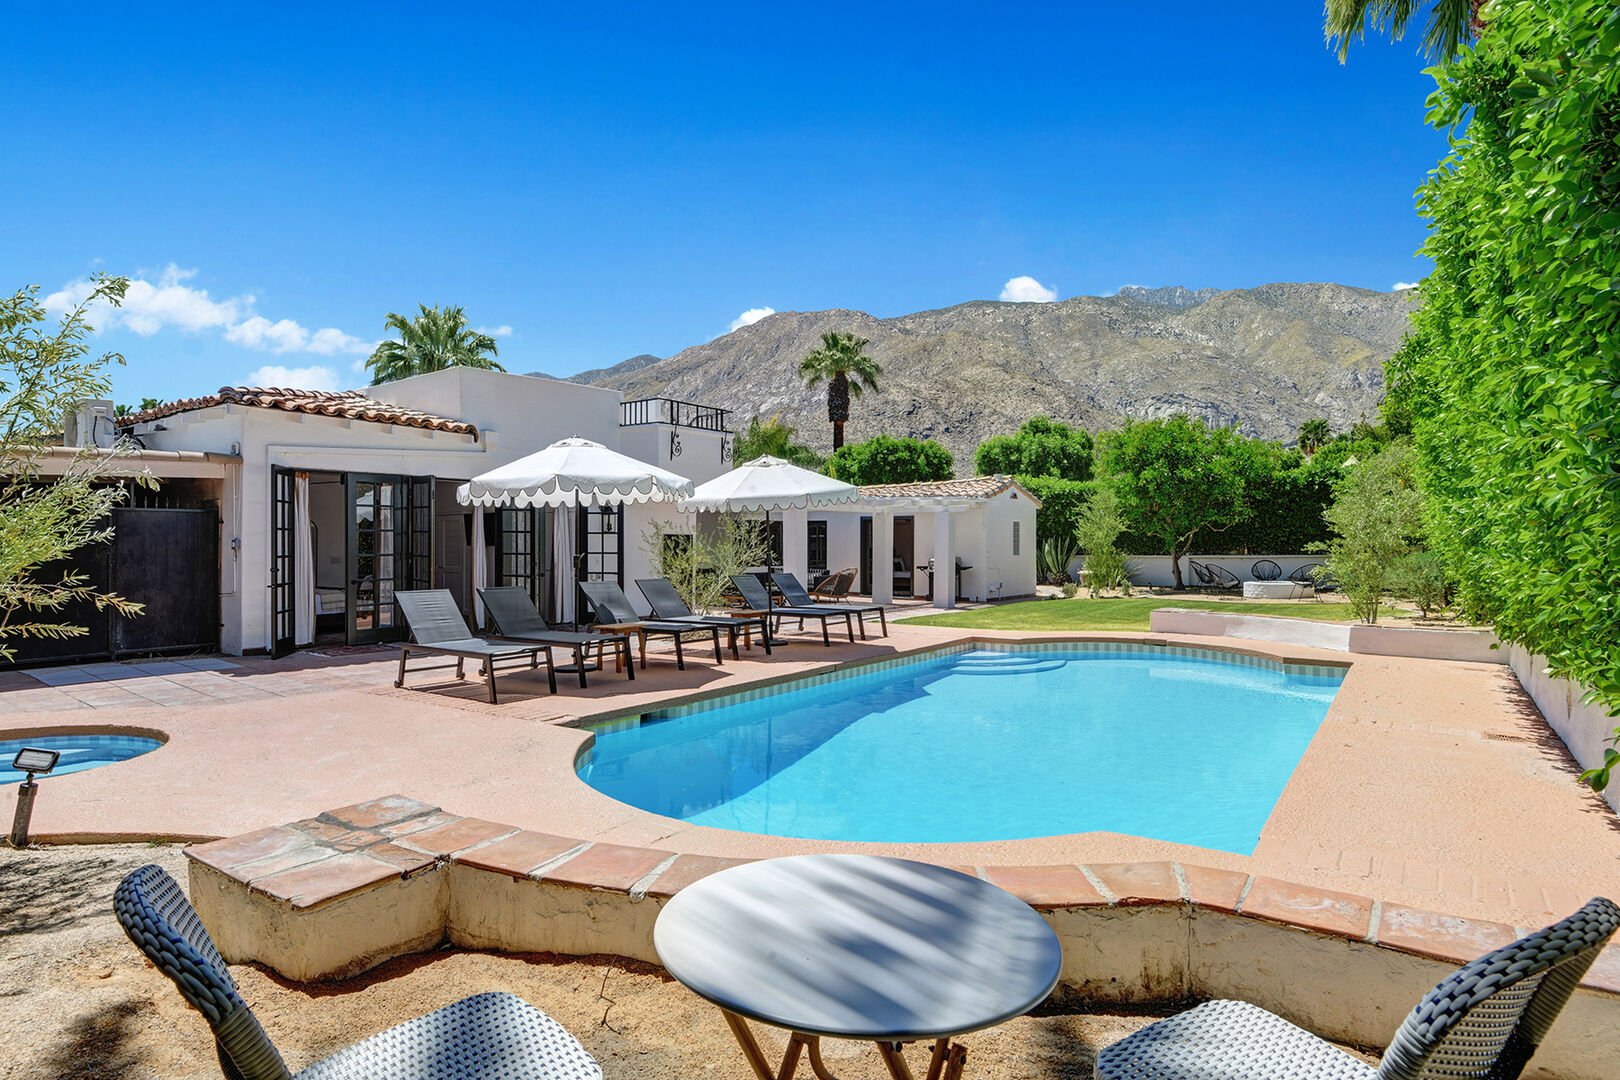 PRIVATE RESORT LIKE POOL, SPA, FIREPIT AND BBQ GRILL IN THIS OVERSIZED COMPOUND IN MOVIE COLONY.  AMAZING MOUNTAIN VIEWS!